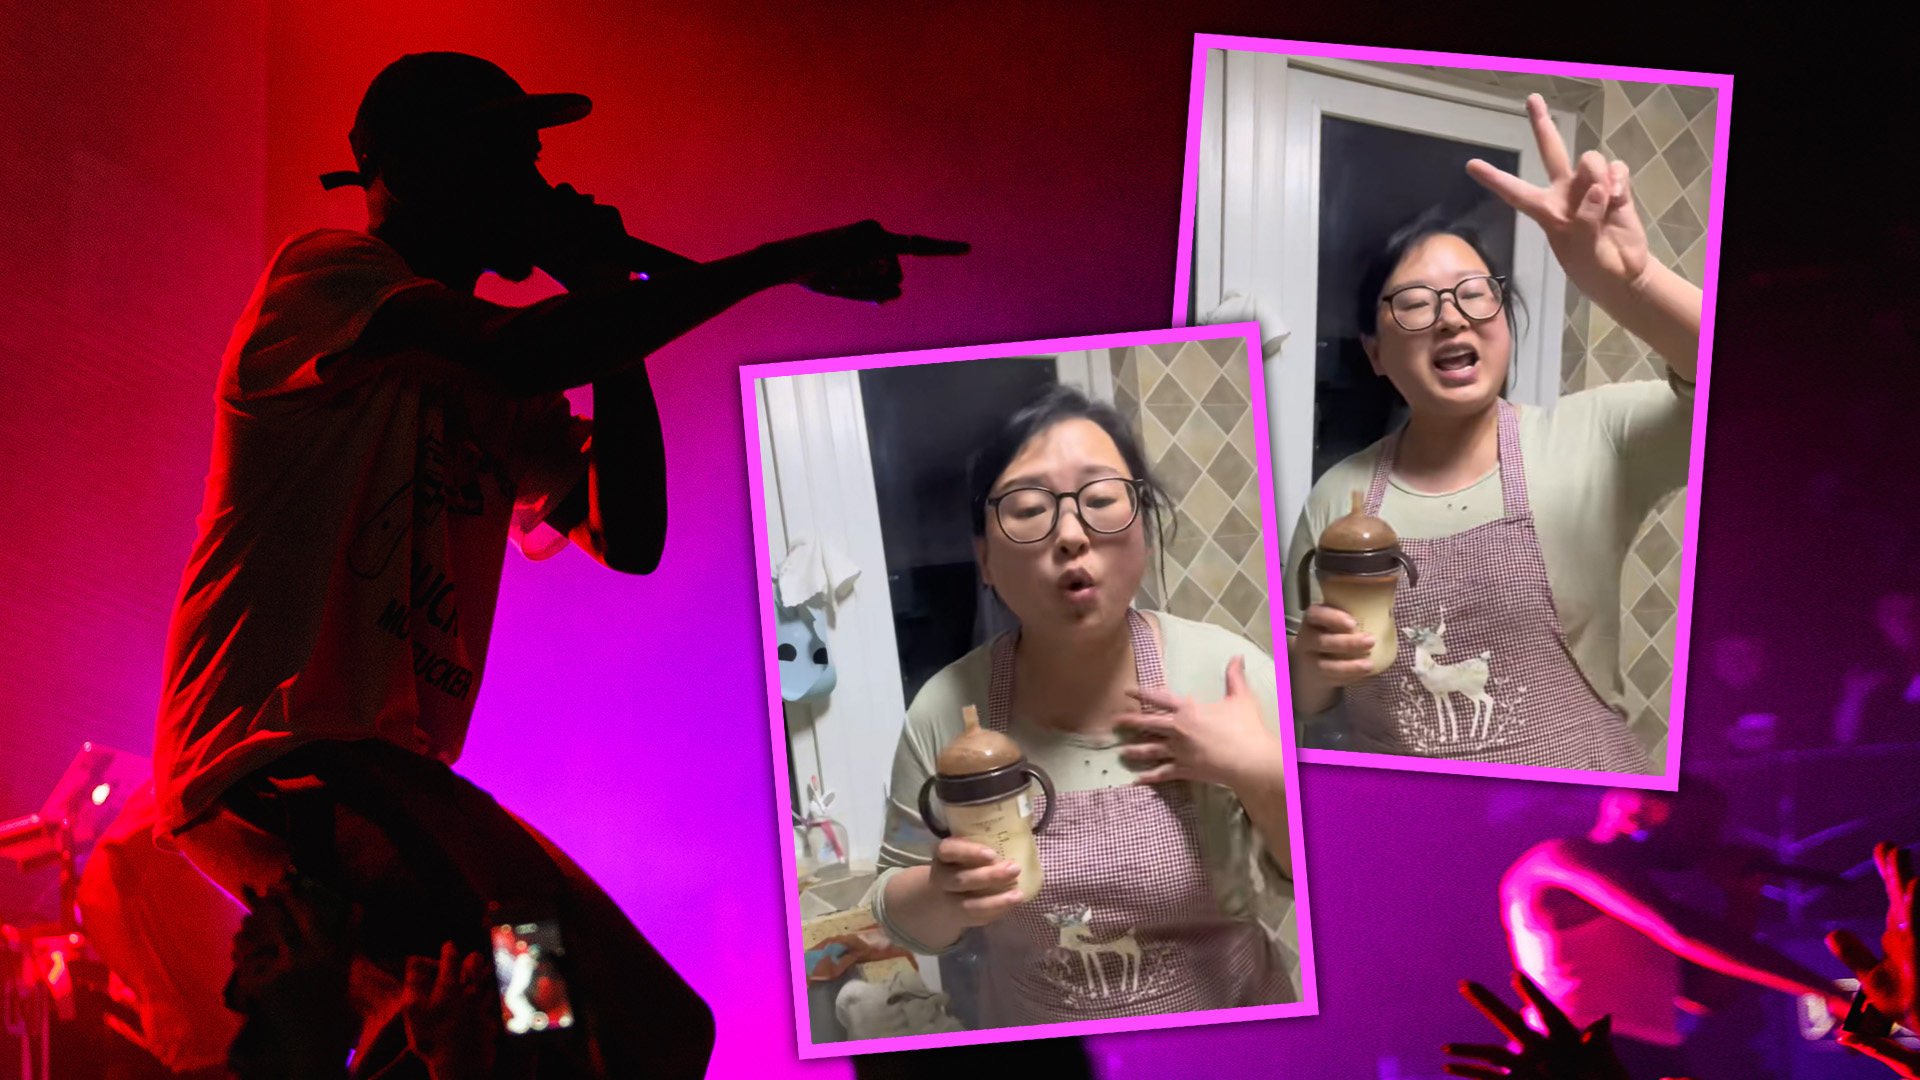 A 40-year-old mother in China has become an online video sensation after she taught herself how to write and perform rap songs while coping with daily pressures of homemaking and childcare. Photo: SCMP composite/Shutterstock/Douyin